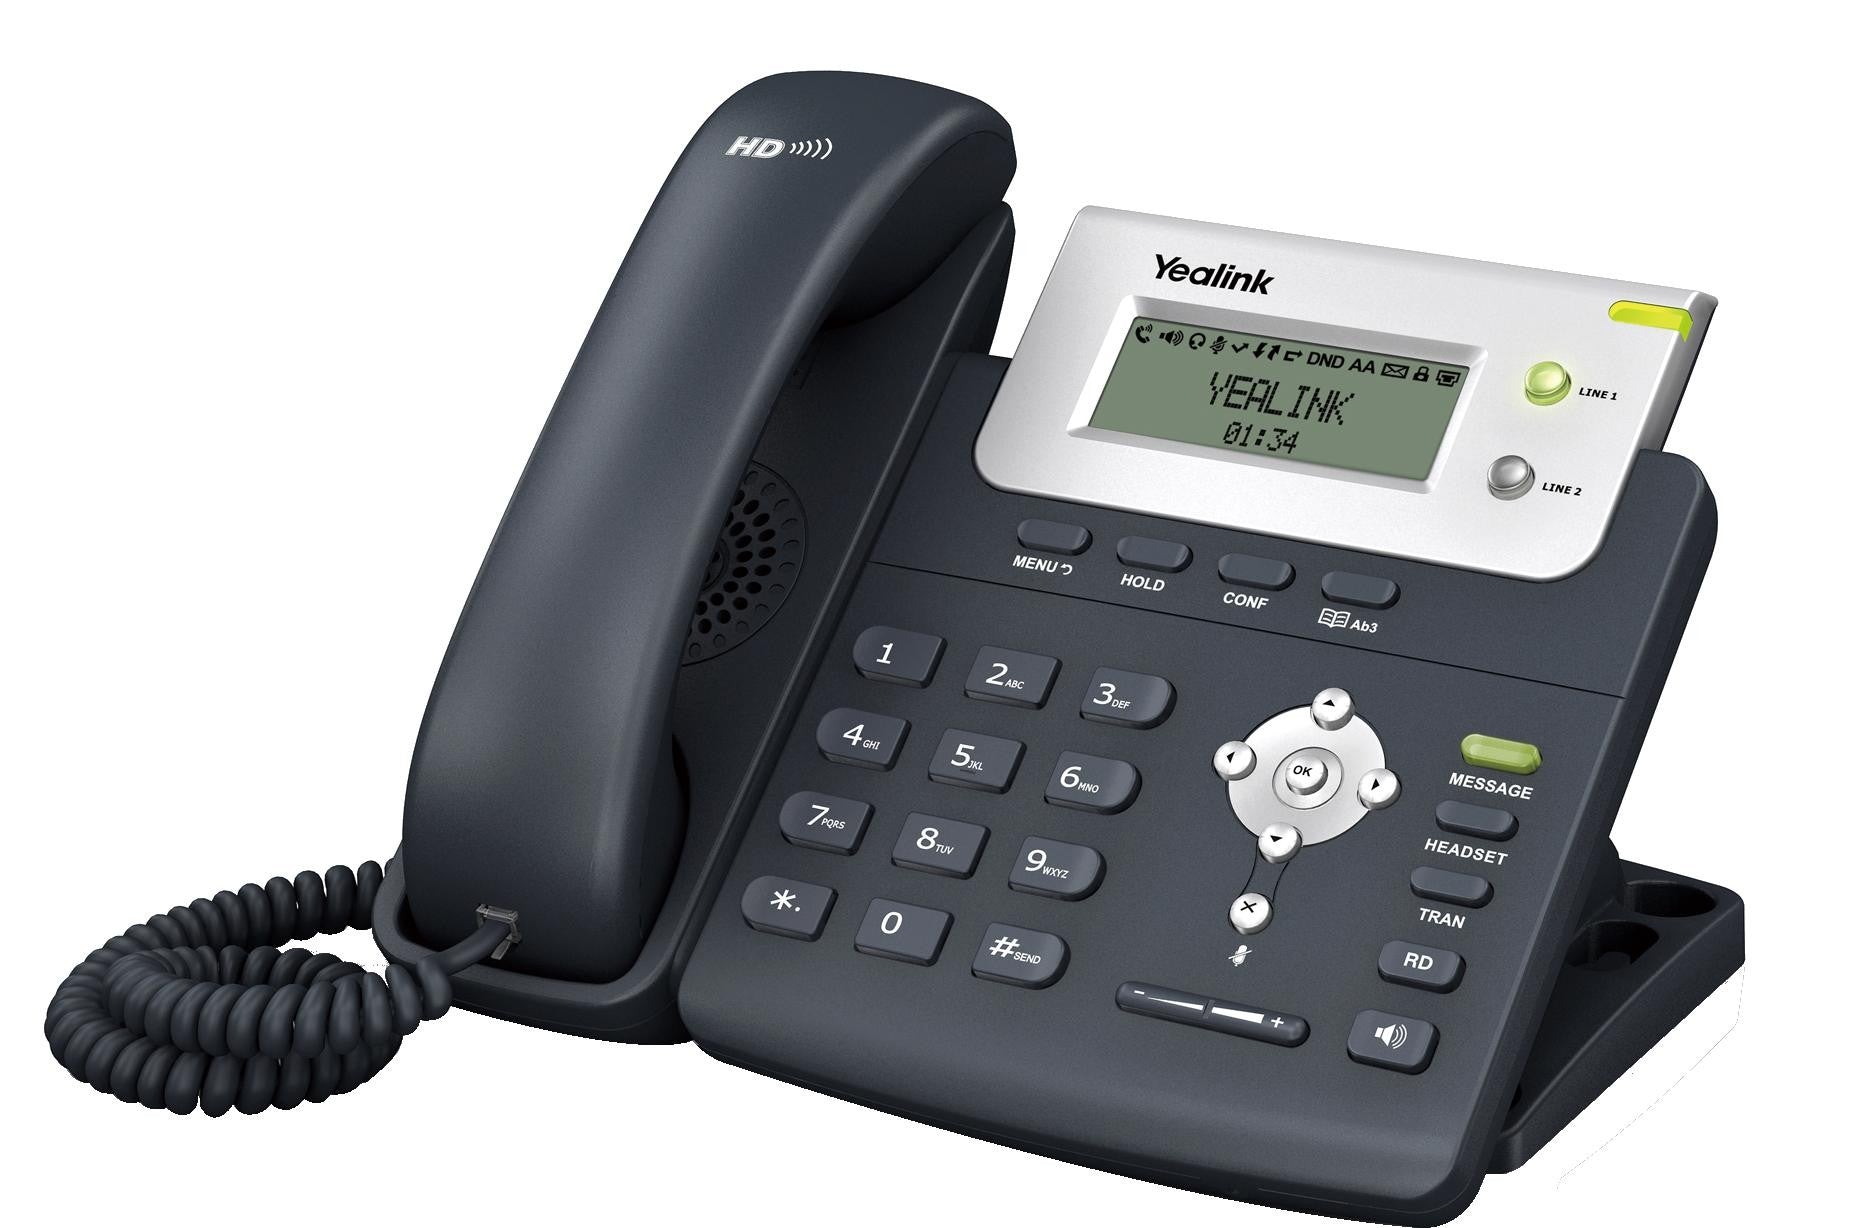 Yealink SIP-T20P IP Phone 2-Line 2-Port PoE w/Out Power Supply (SIP-T20P) Refurbished